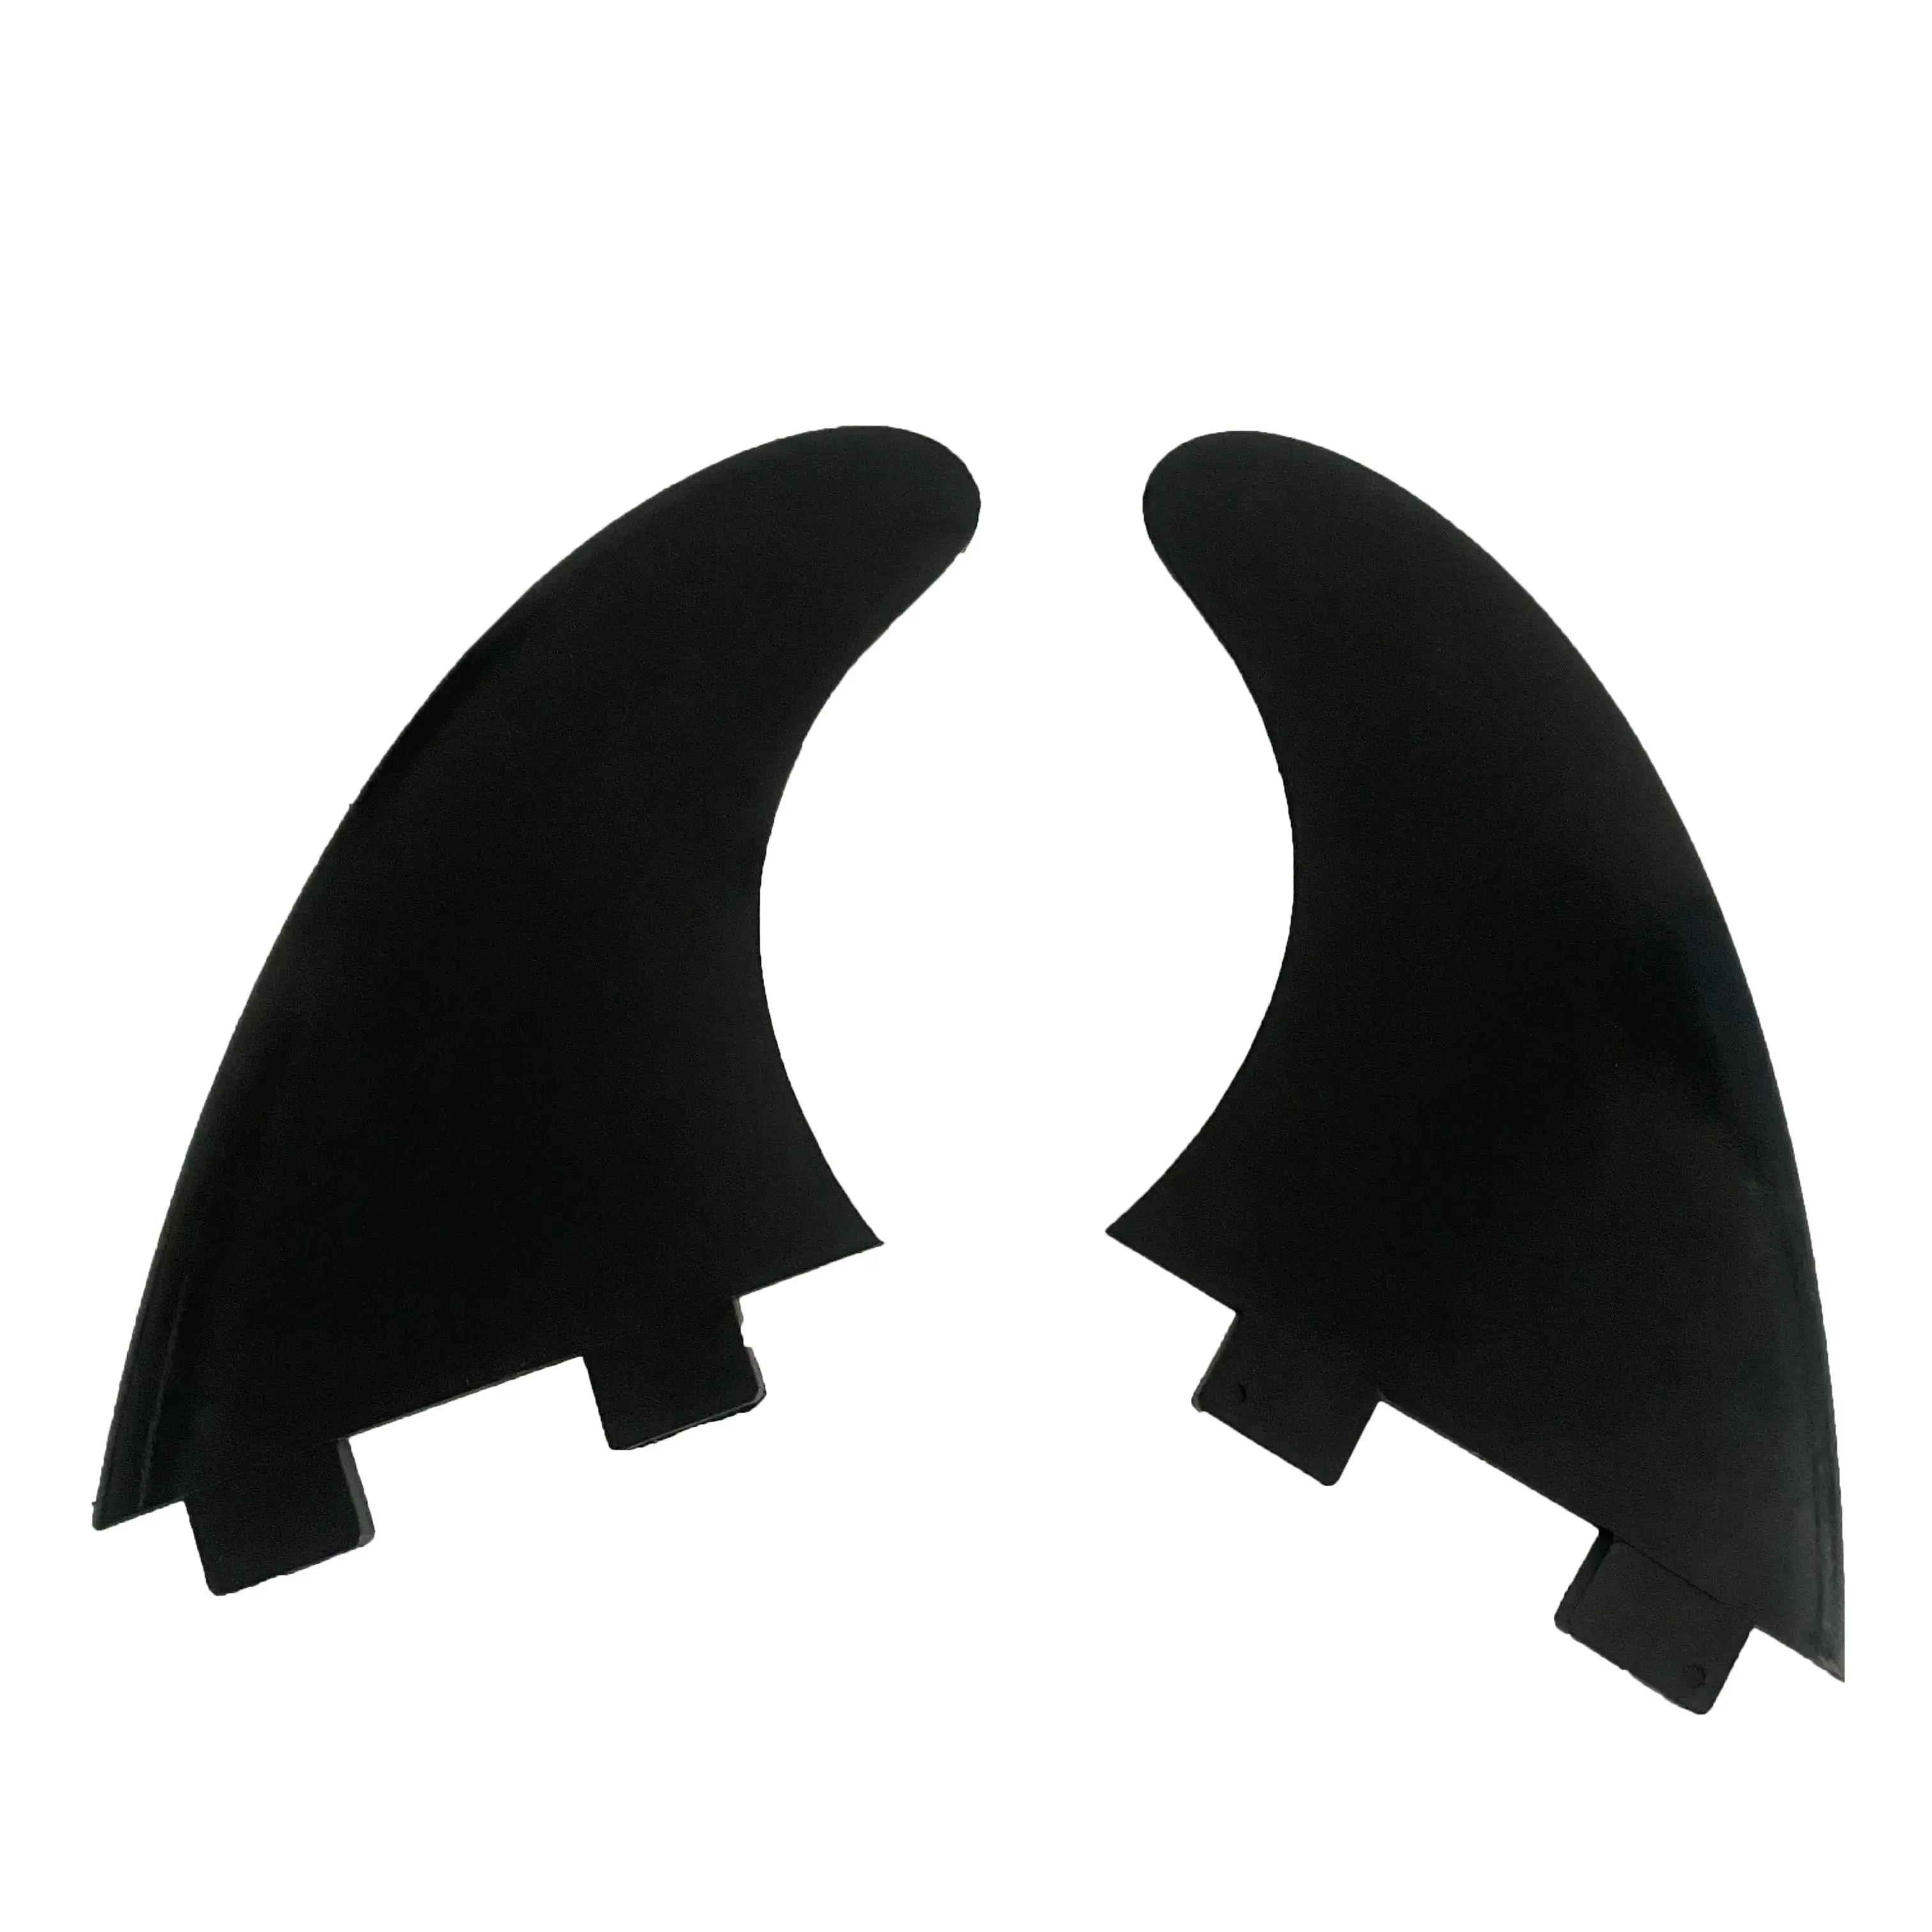 2 Pcs G5 Surfboard Fins SUP Accessory Surf Fin Paddle Board Fin